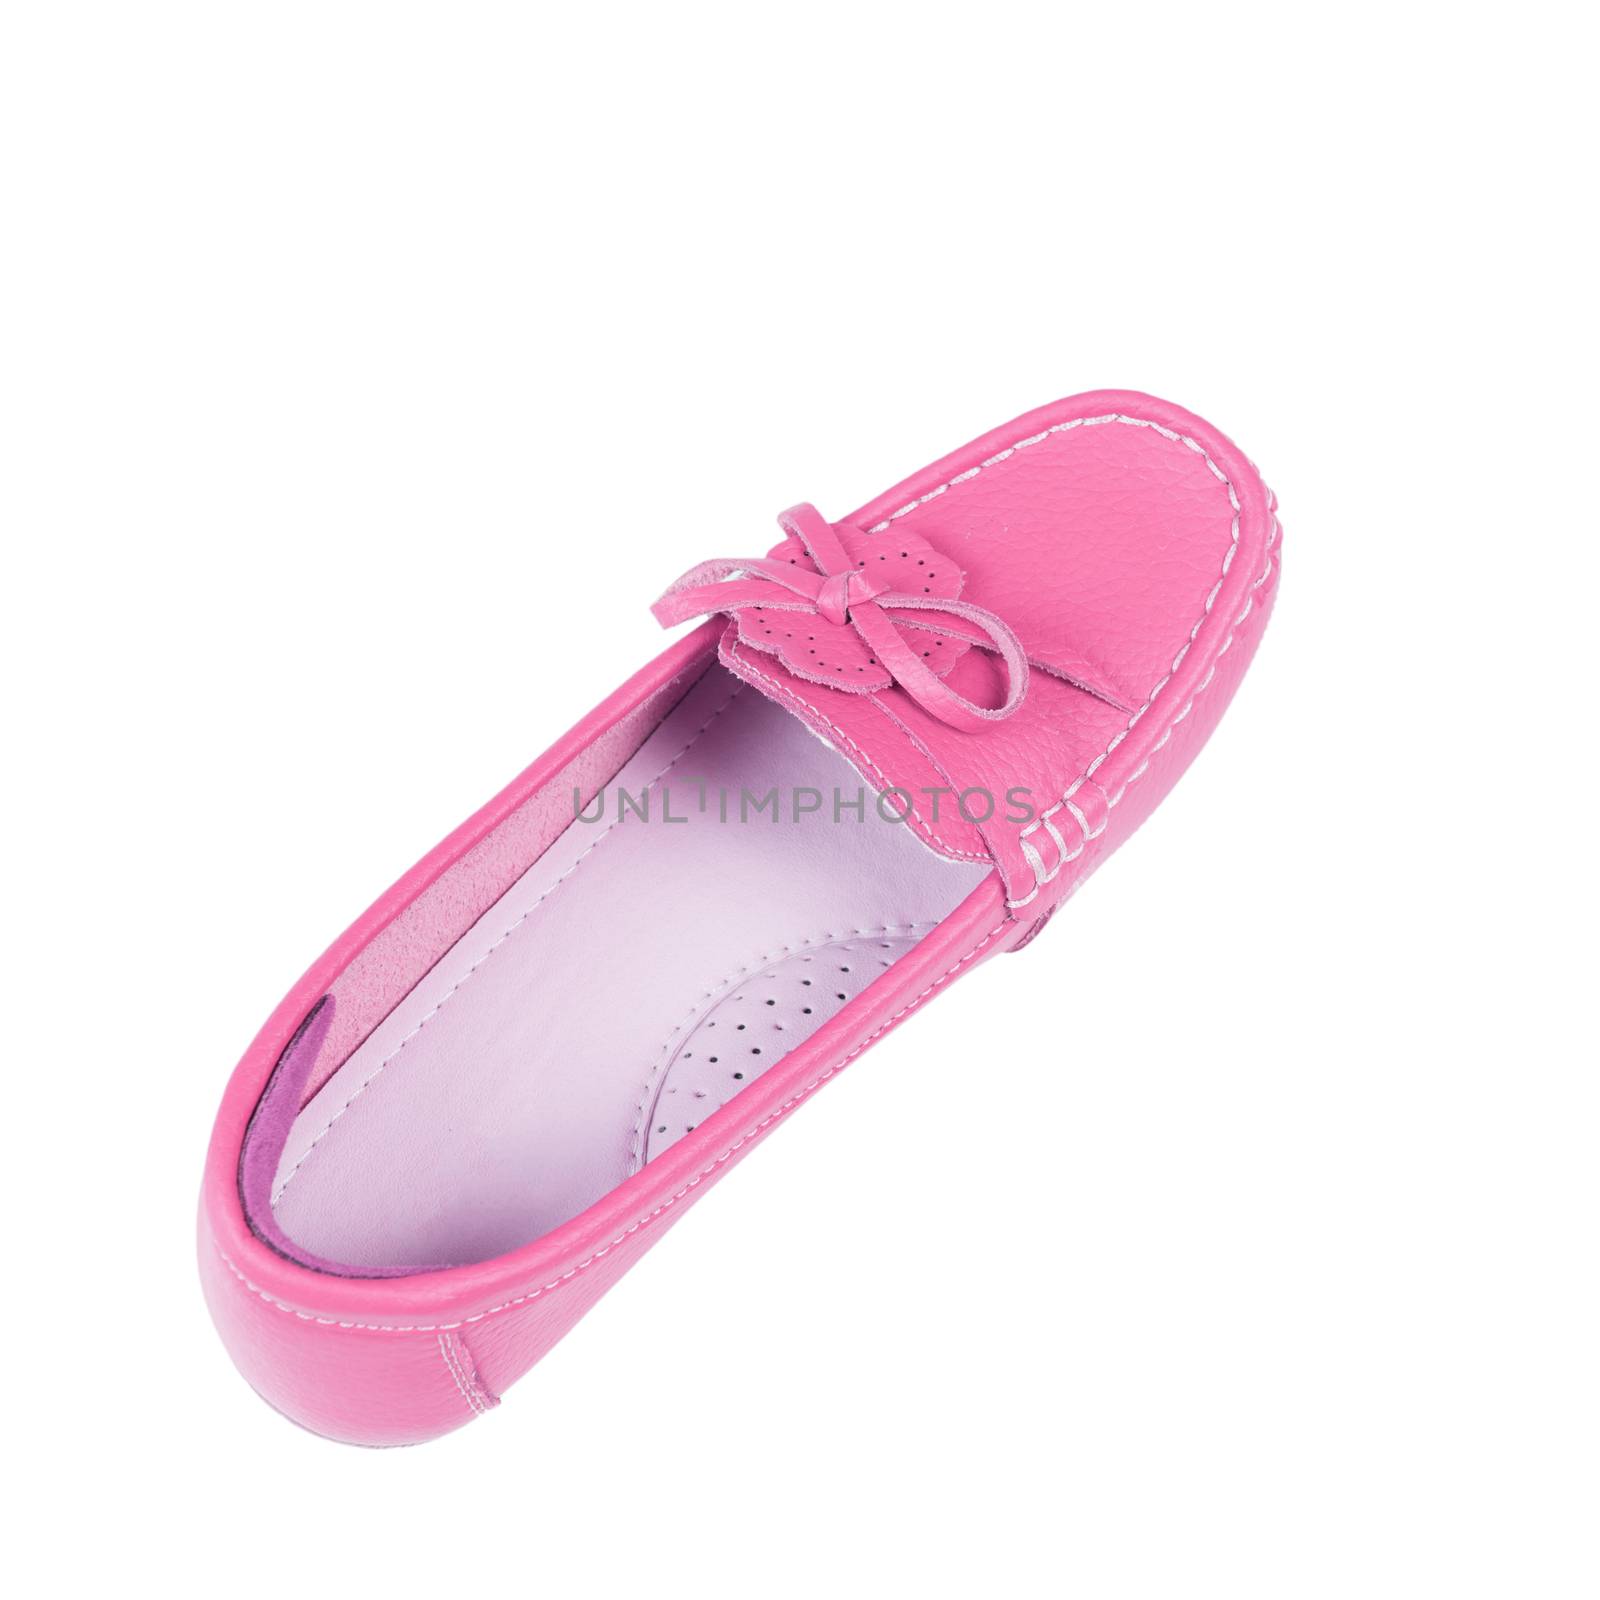 Single pink casual leather flat shoes isolated on white backgrou by foto2rich